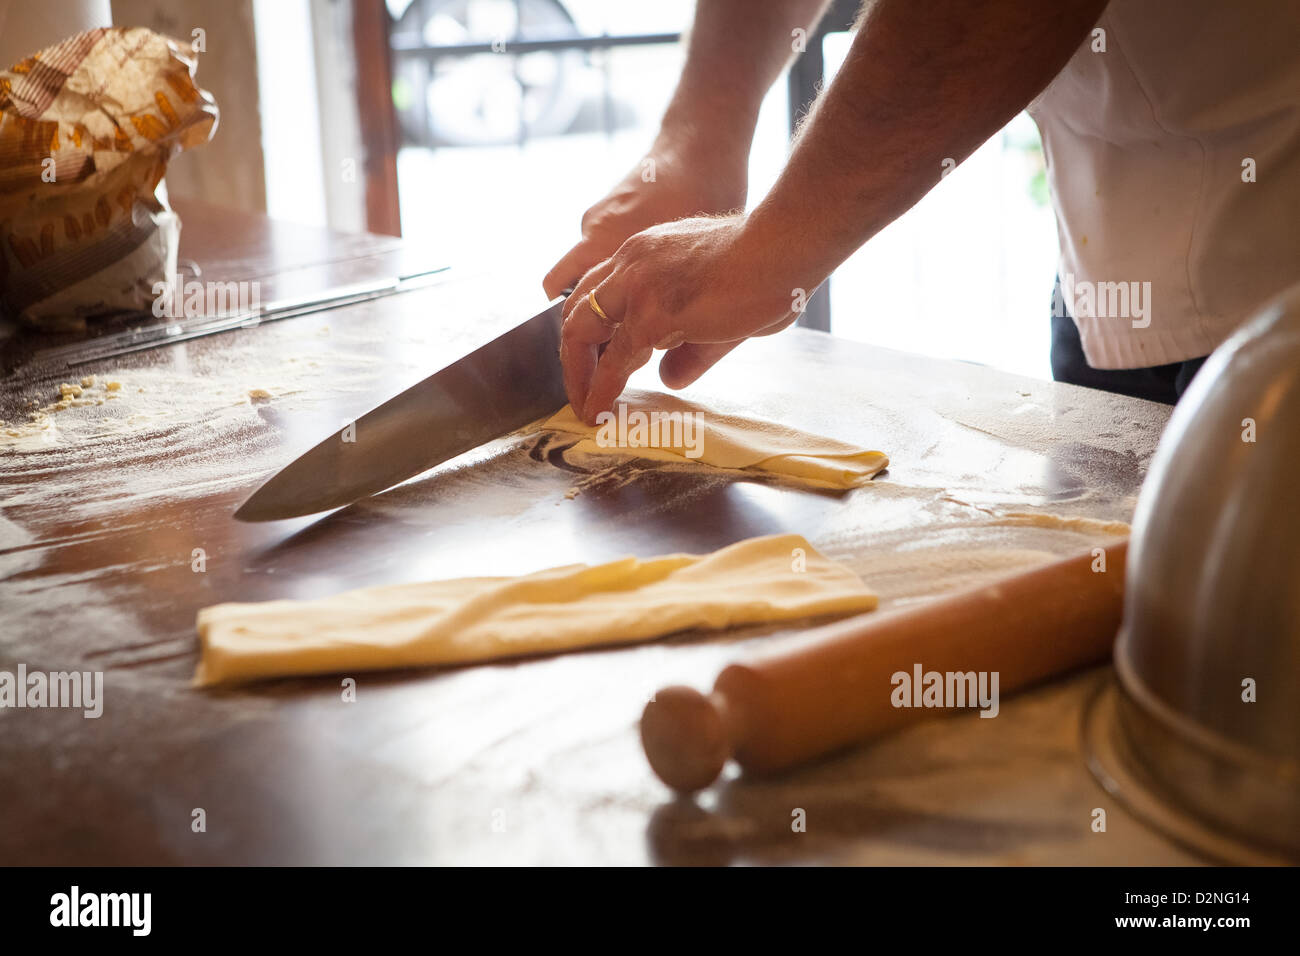 Rolling and cutting Tagliatelle pasta strips Stock Photo